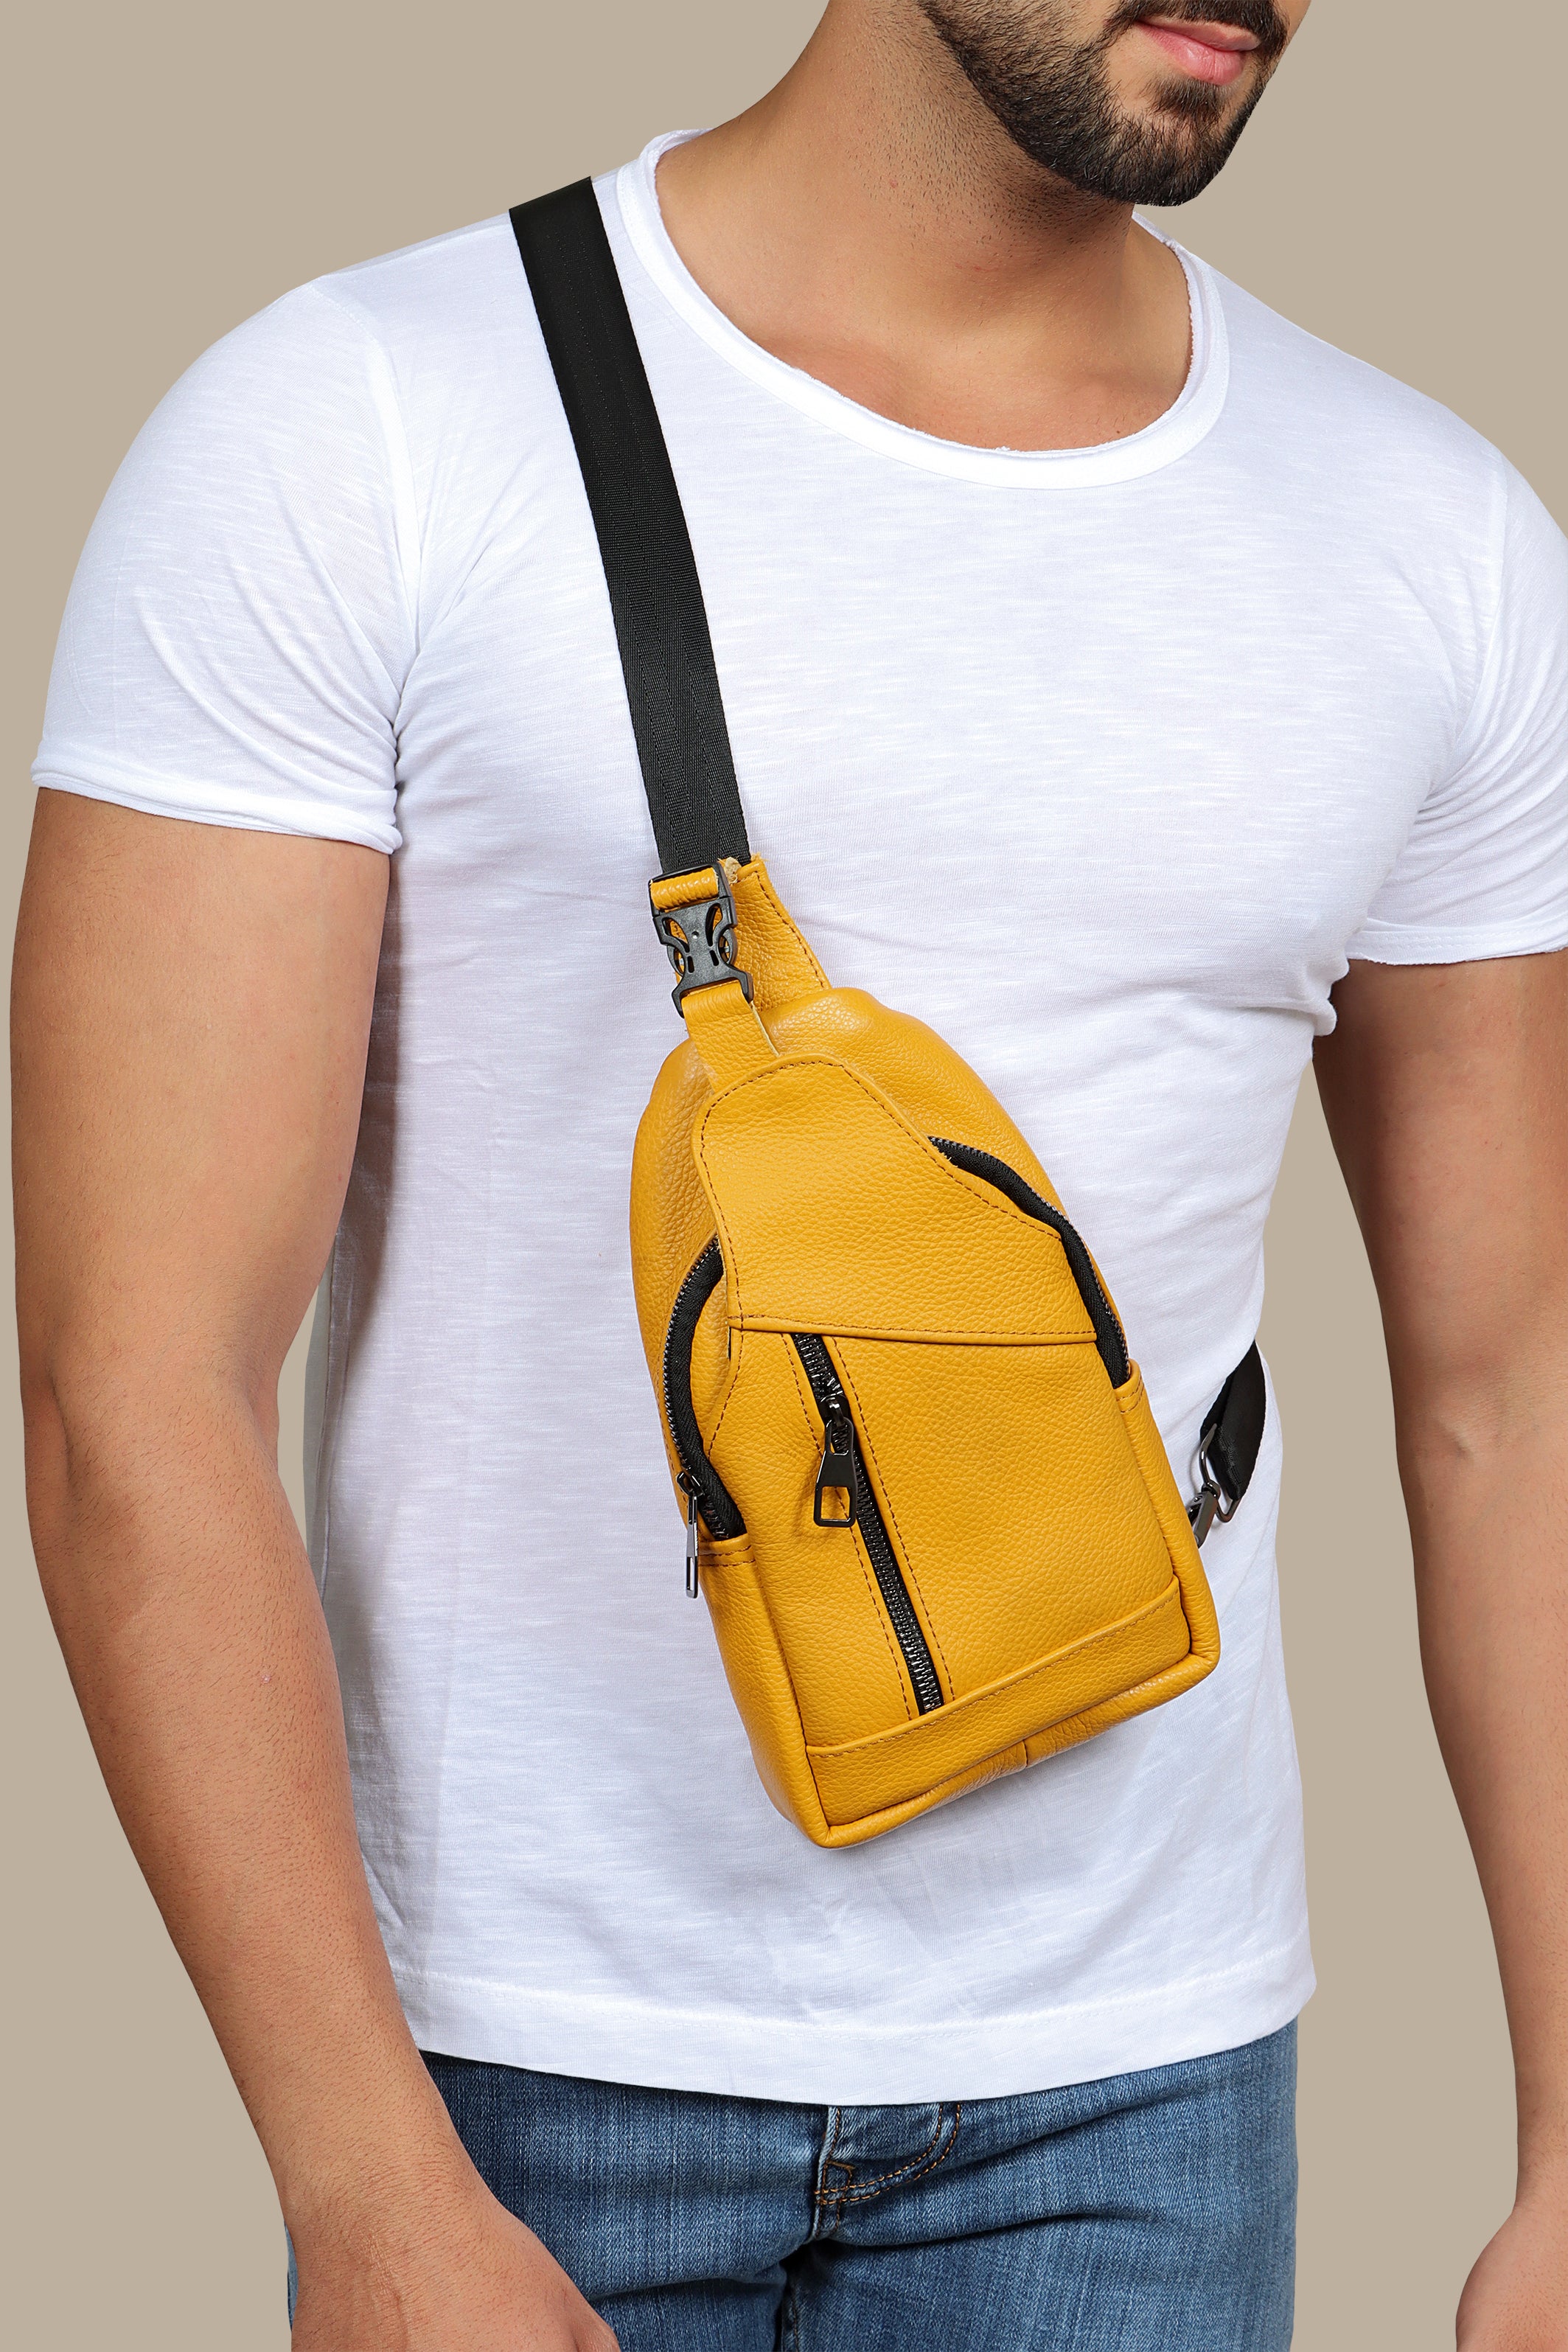 Chic Yellow Leather Crossbody Bag with Curved Sides